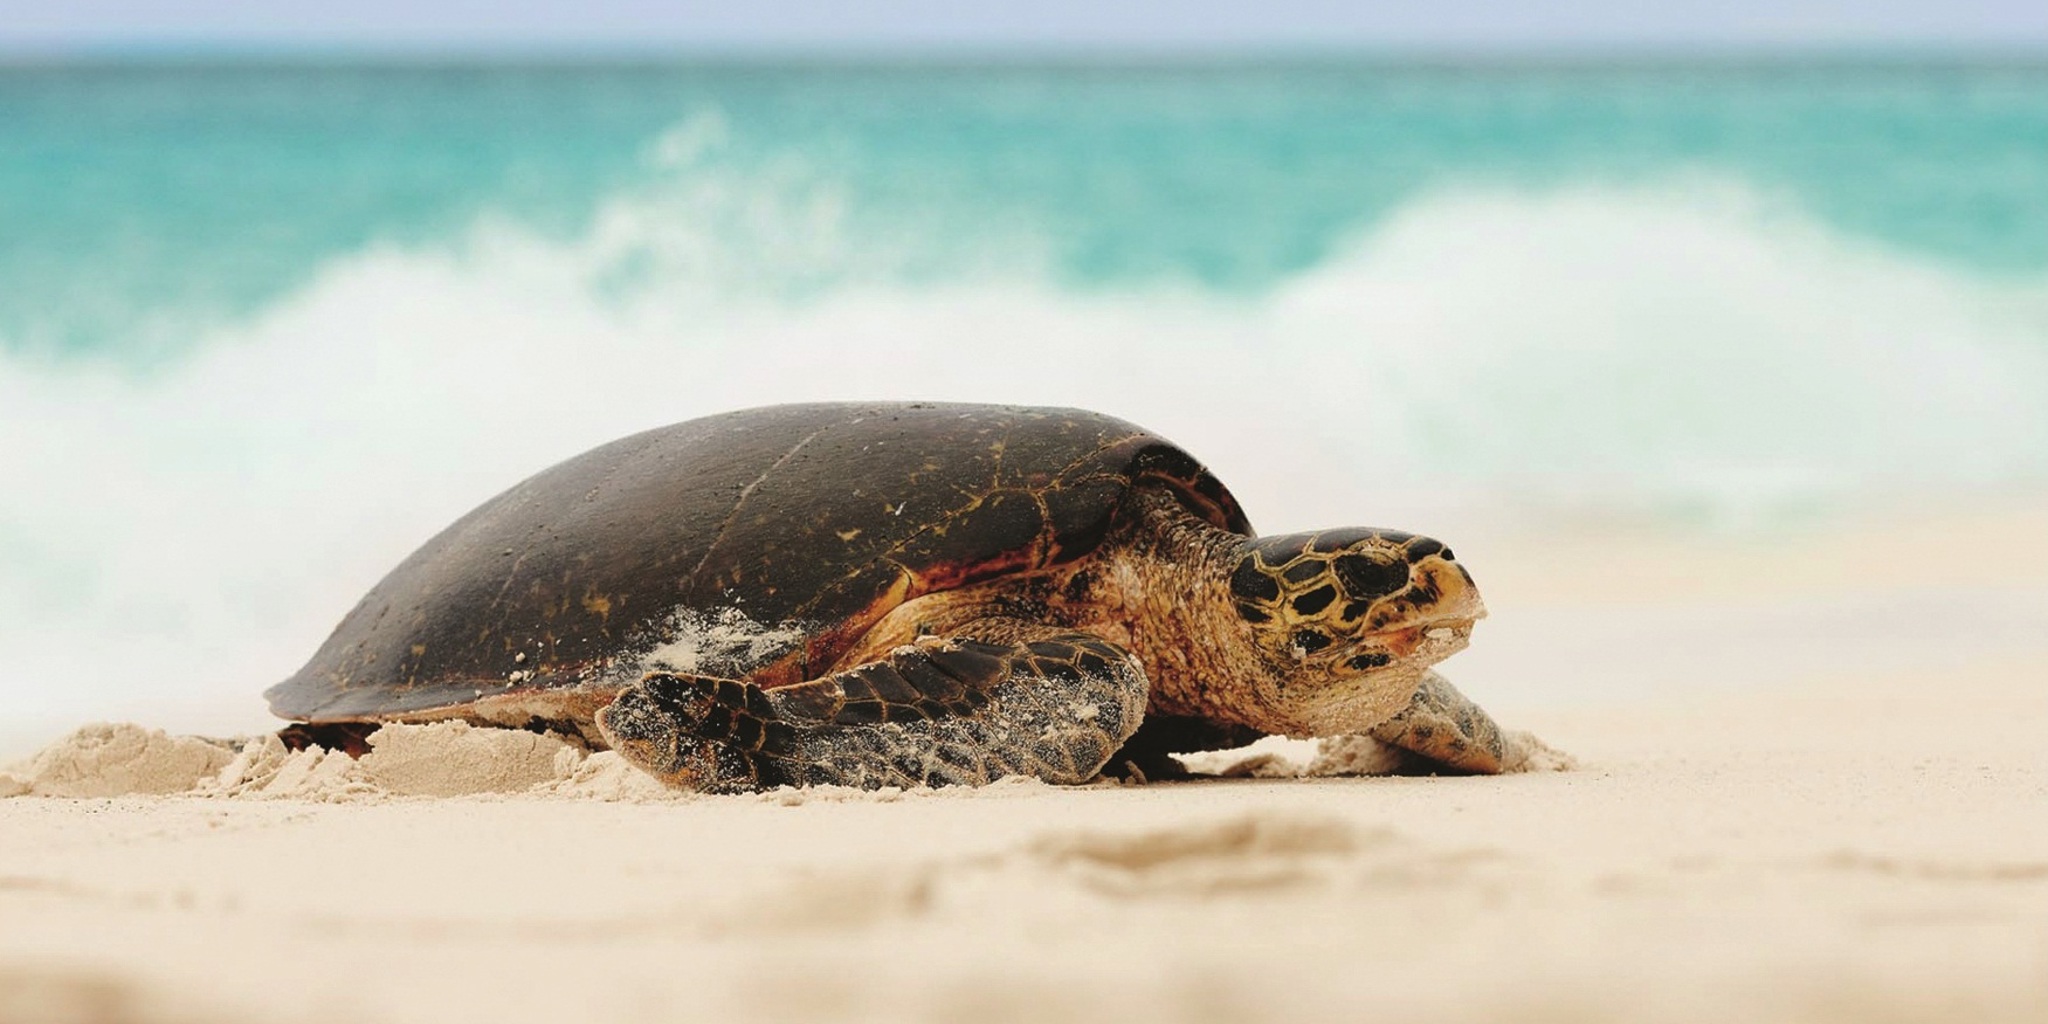 turtle on the beach, unspoiled nature, seychelles